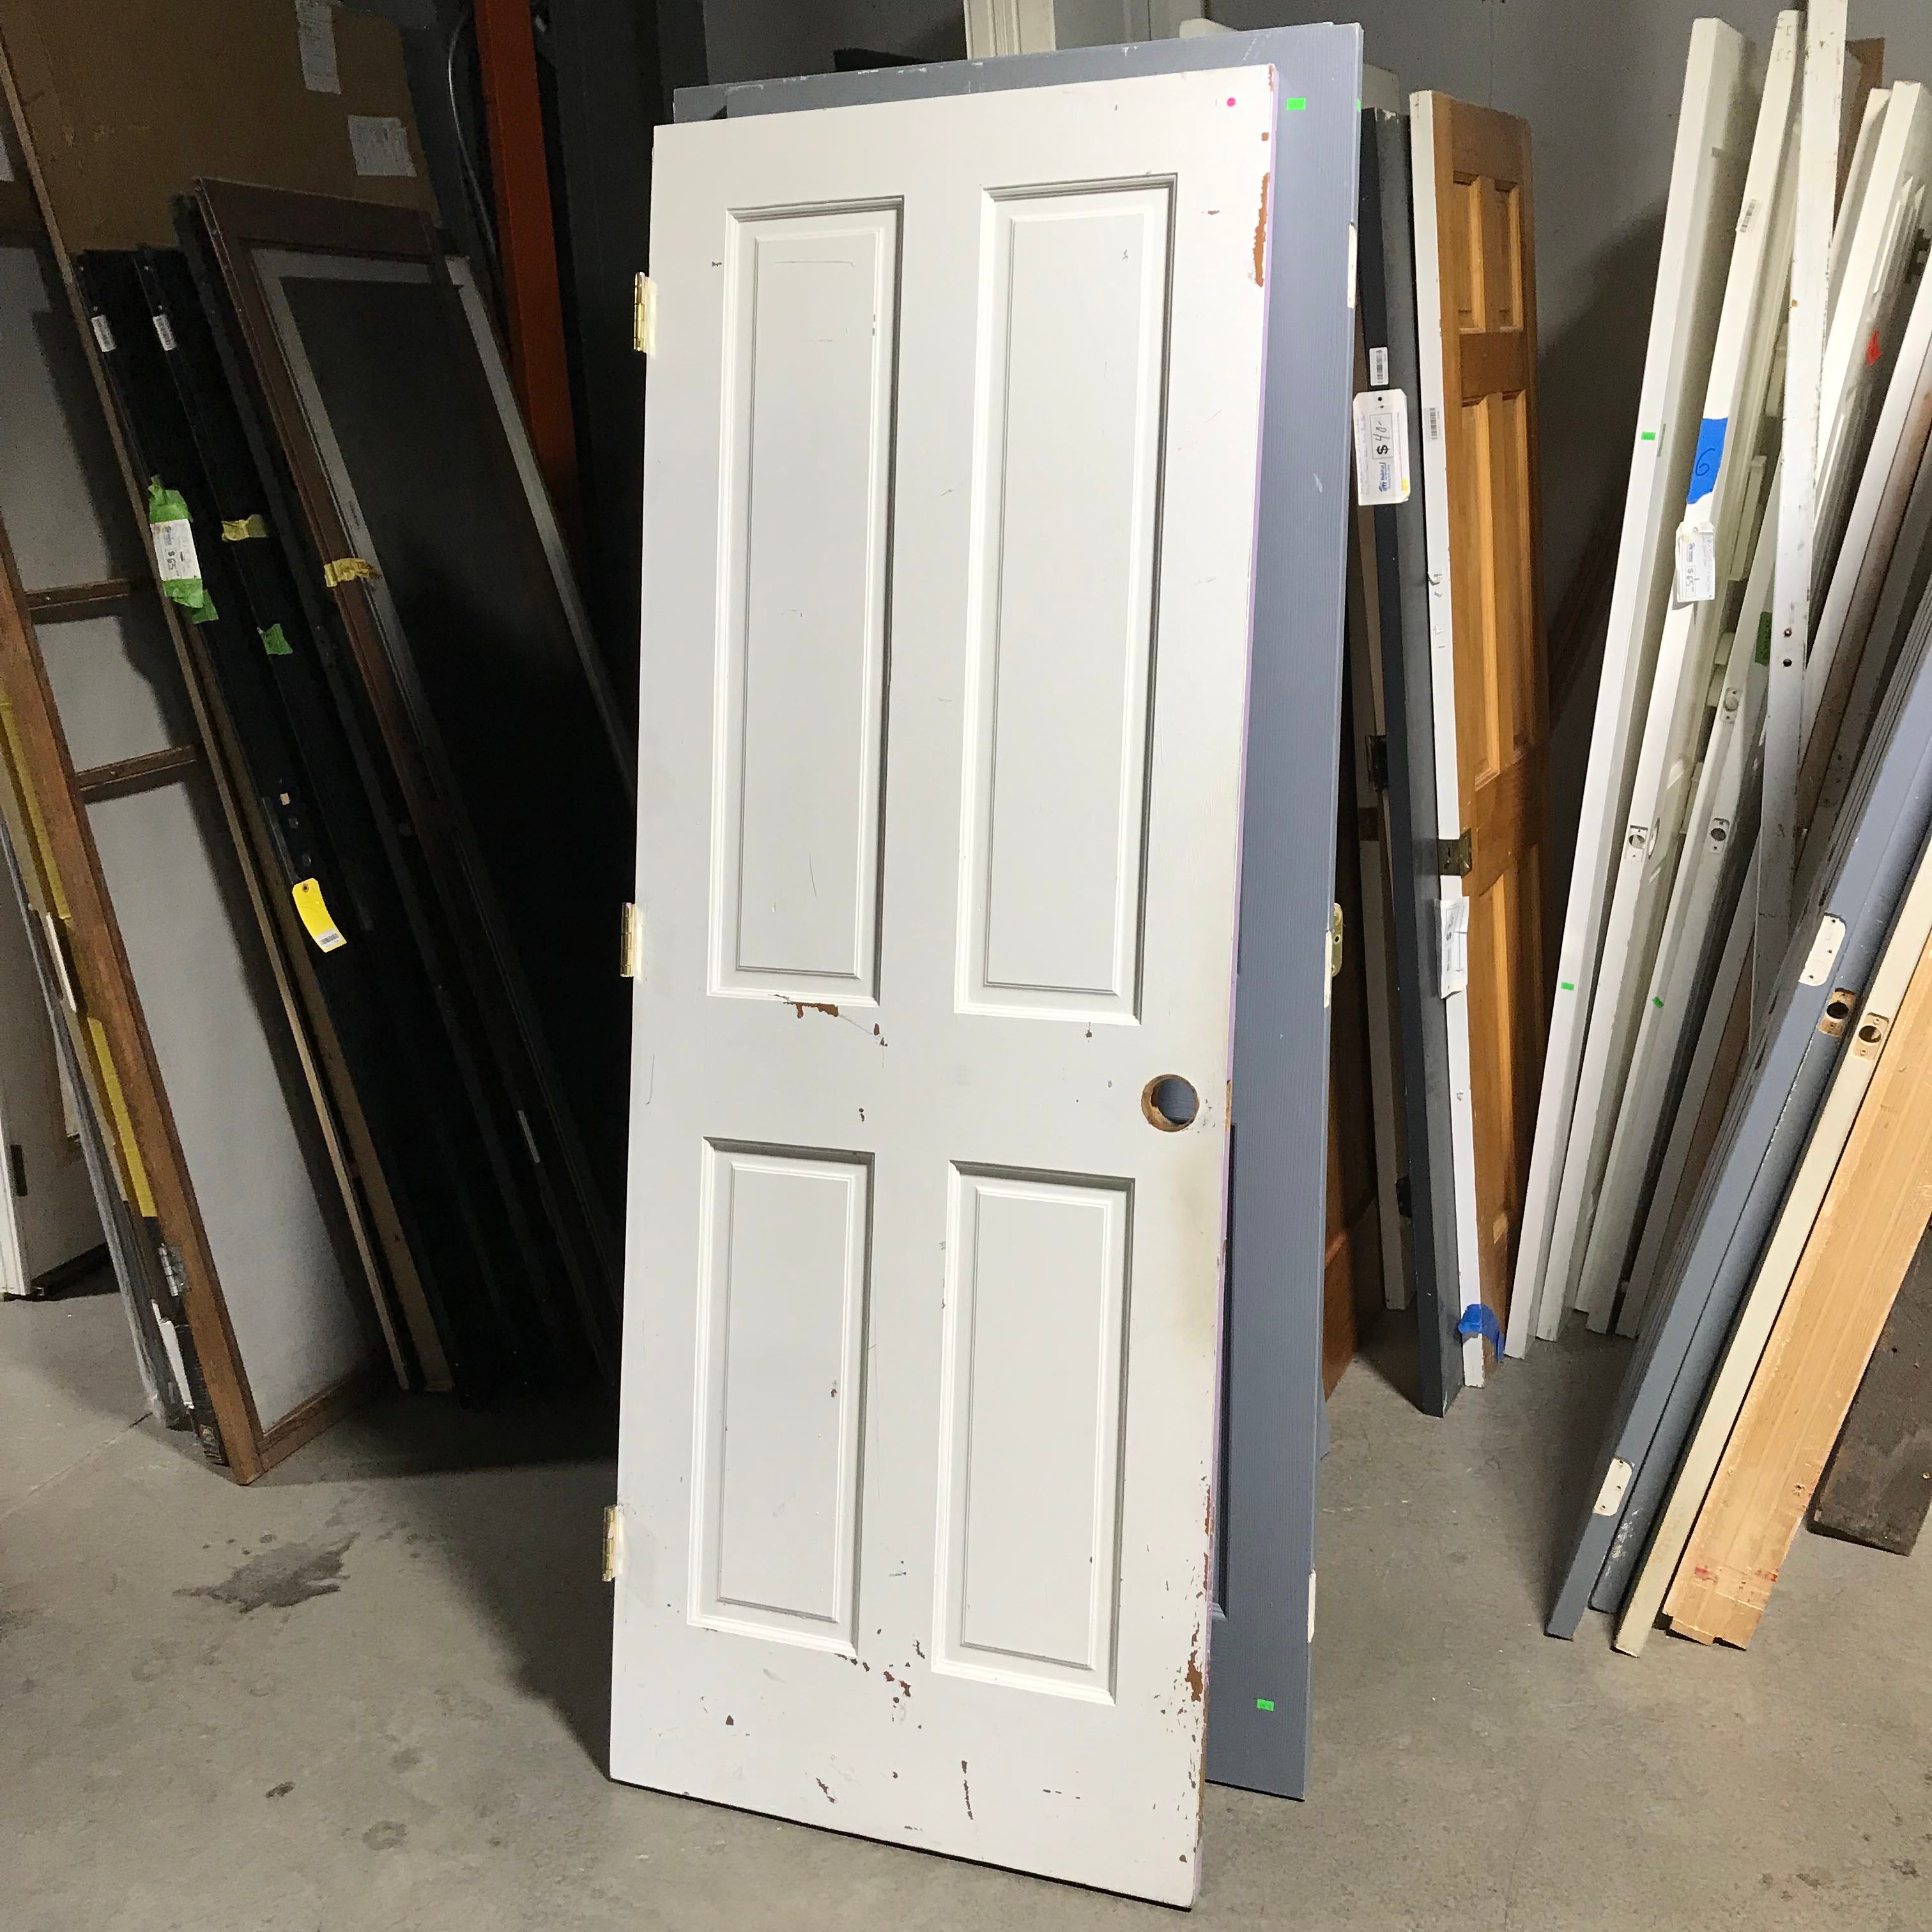 29.75"x 79.75"x 1.375" 4 Panel One Side Pink Purple Other Side Painted White Solid Pine Interior Door